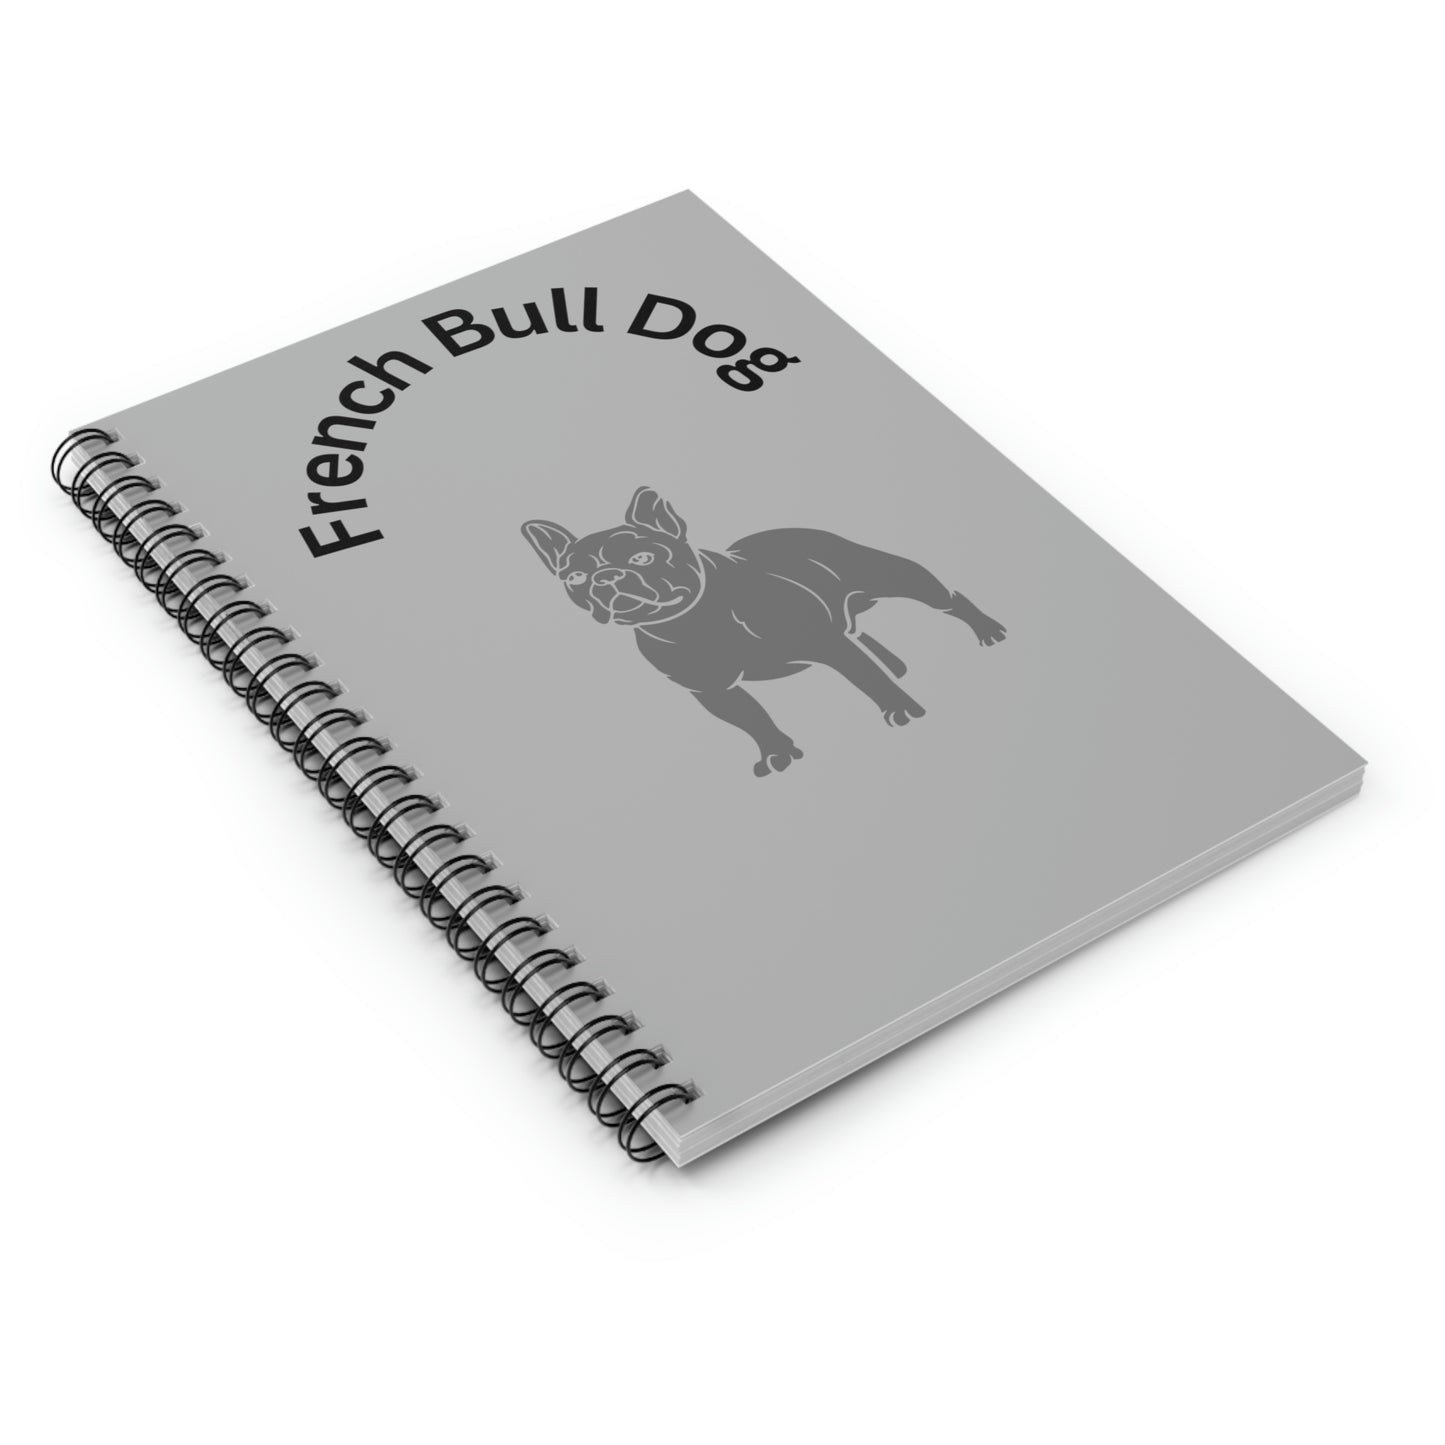 Frenchie Spiral Notebook - Ruled Line